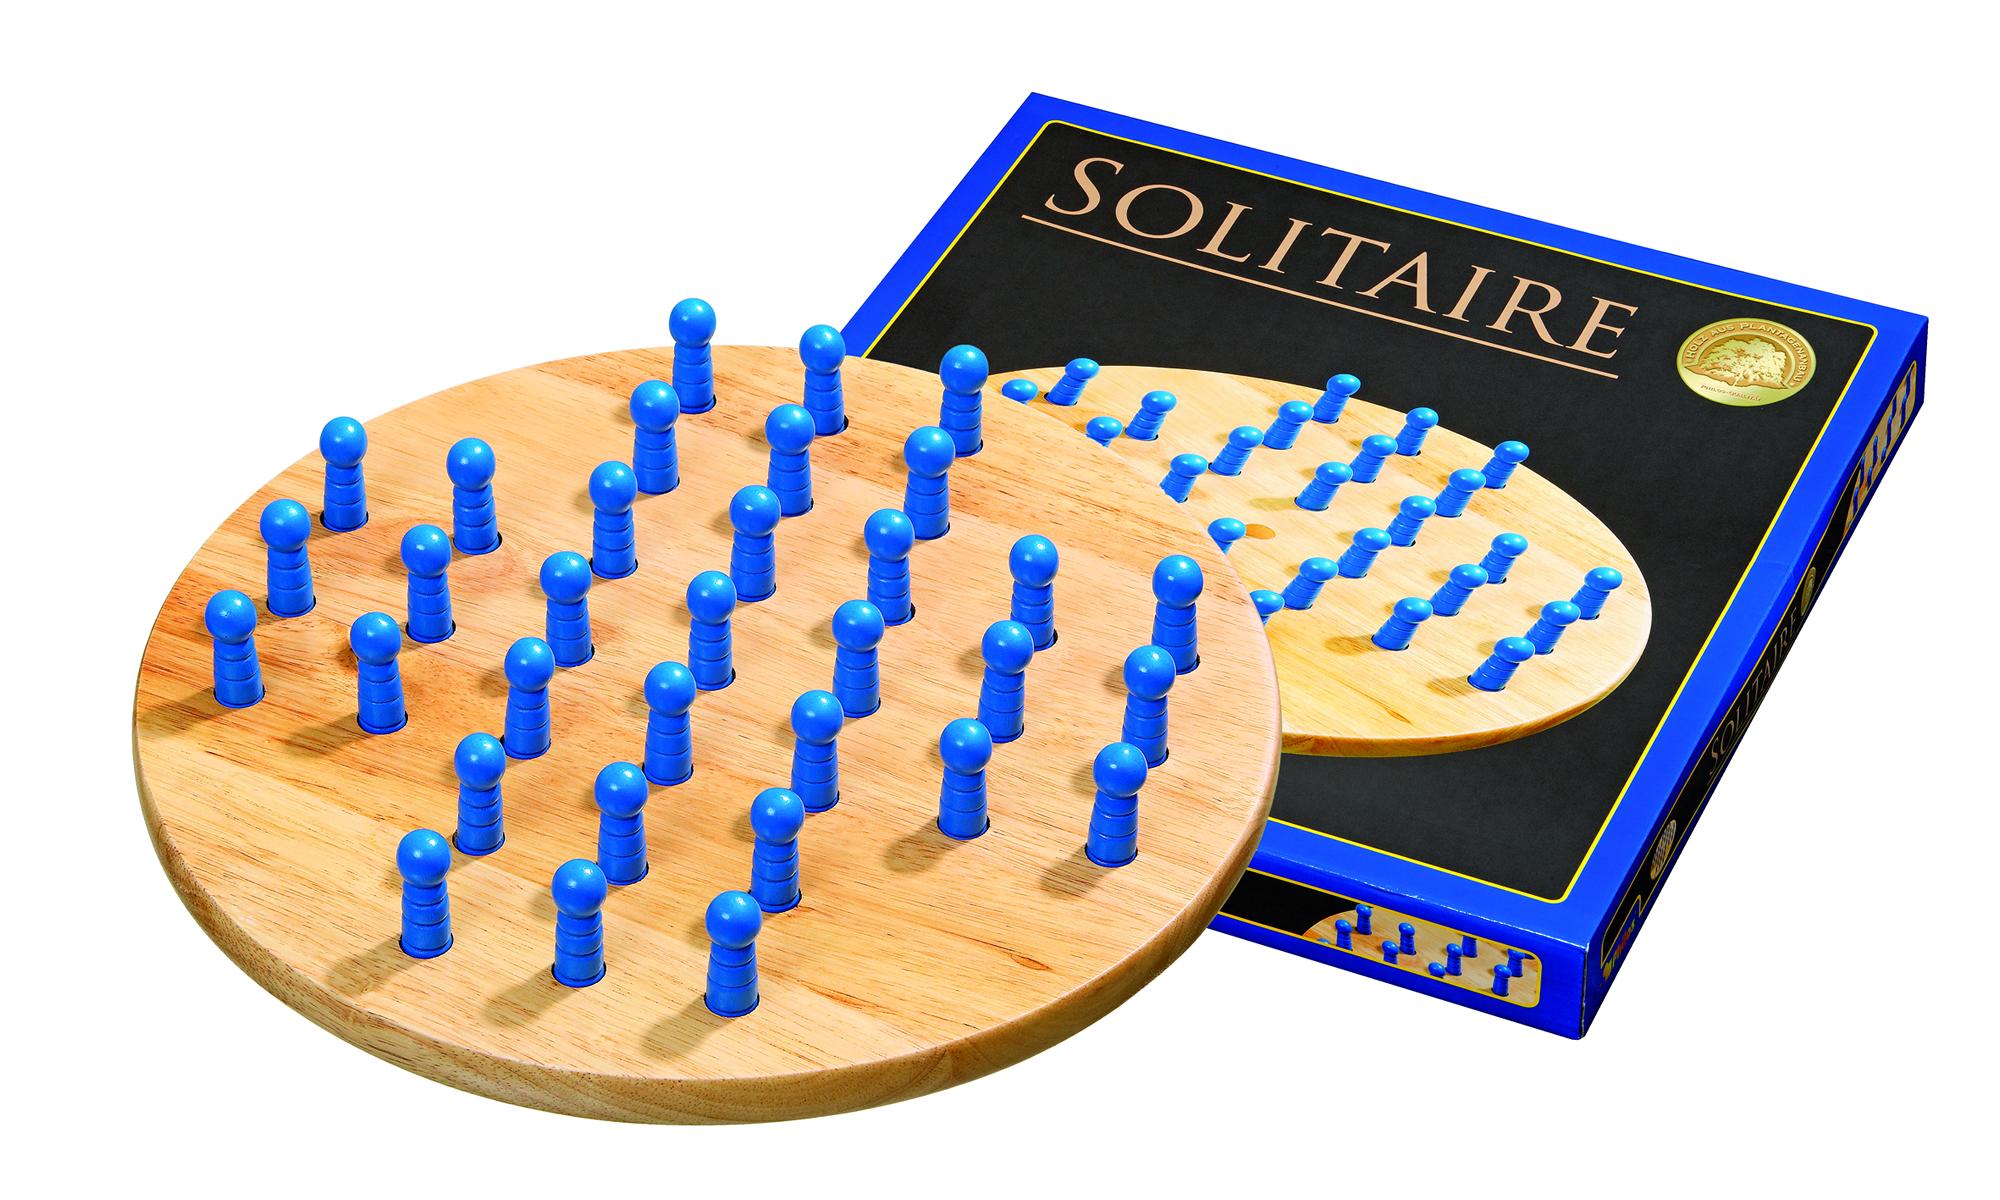 Solitaire, groß, 380 mm